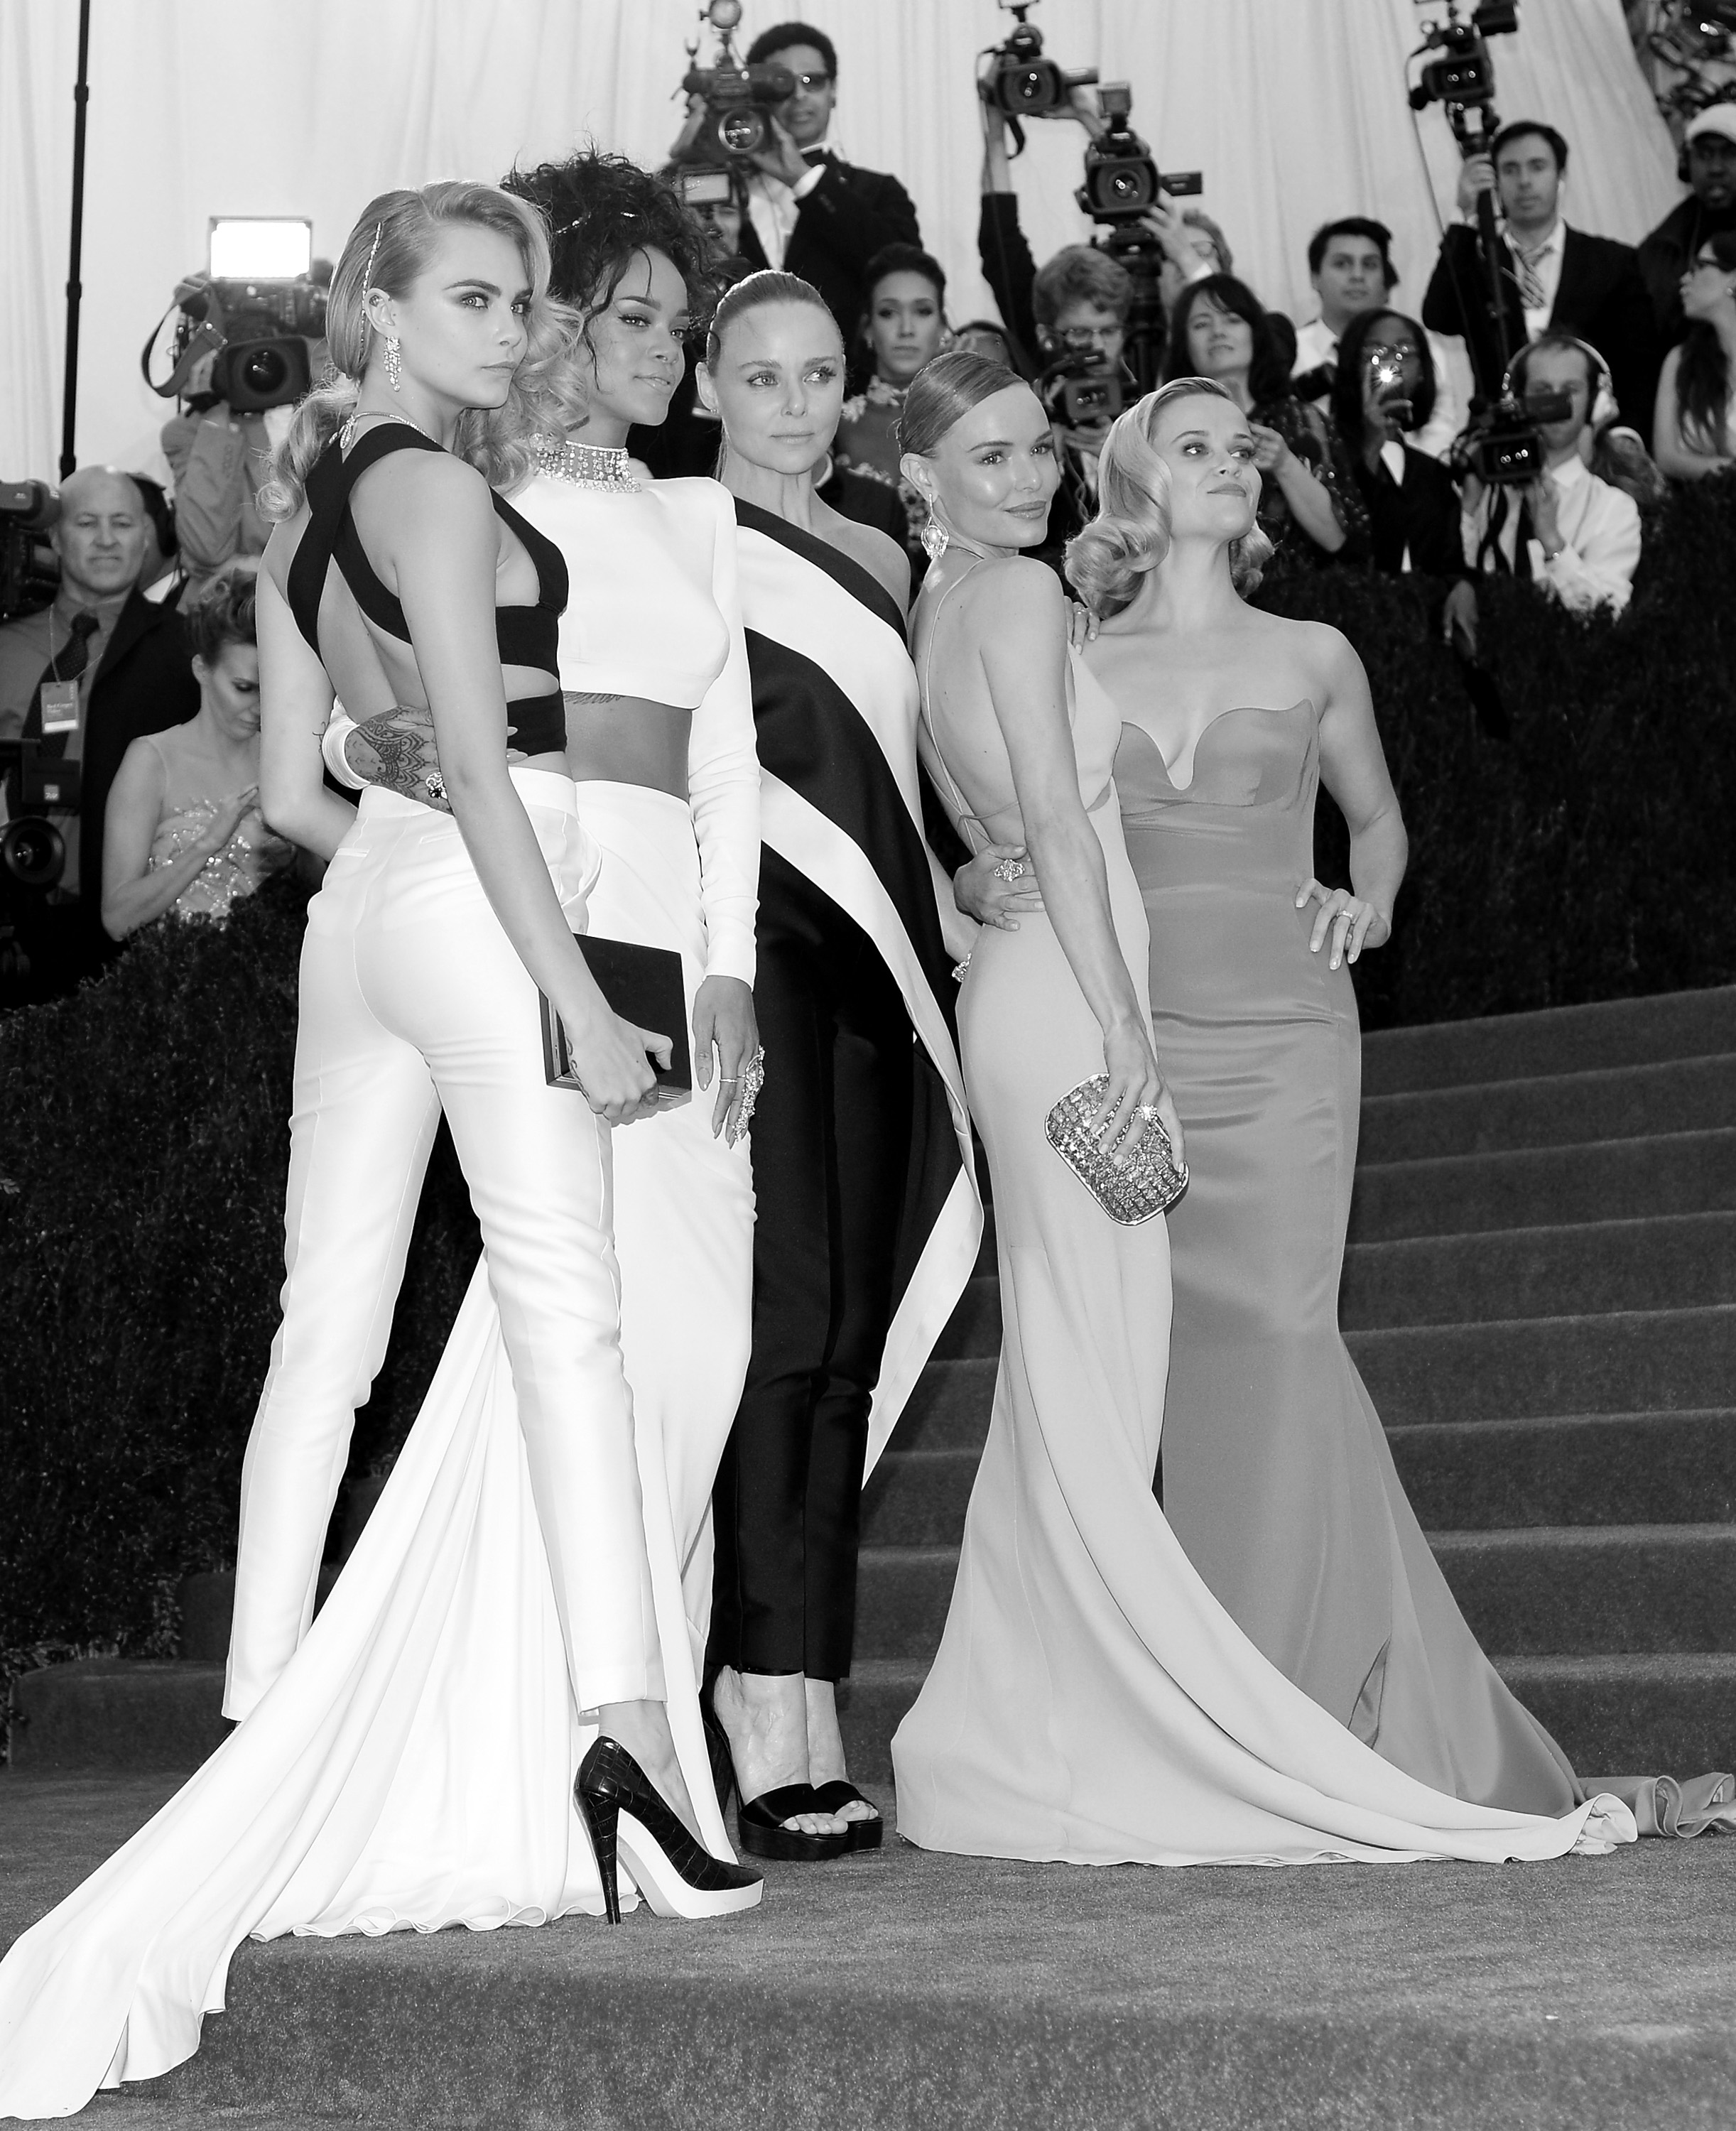 NEW YORK, NY - MAY 05: (EDITORS NOTE: Image was converted to black and white) (L-R) Cara Delevigne, Rihanna, Stella McCartney, Kate Bosworth and Reese Witherspoon attend the "Charles James: Beyond Fashion" Costume Institute Gala at the Metropolitan Museum of Art on May 5, 2014 in New York City. (Photo by Dimitrios Kambouris/Getty Images)